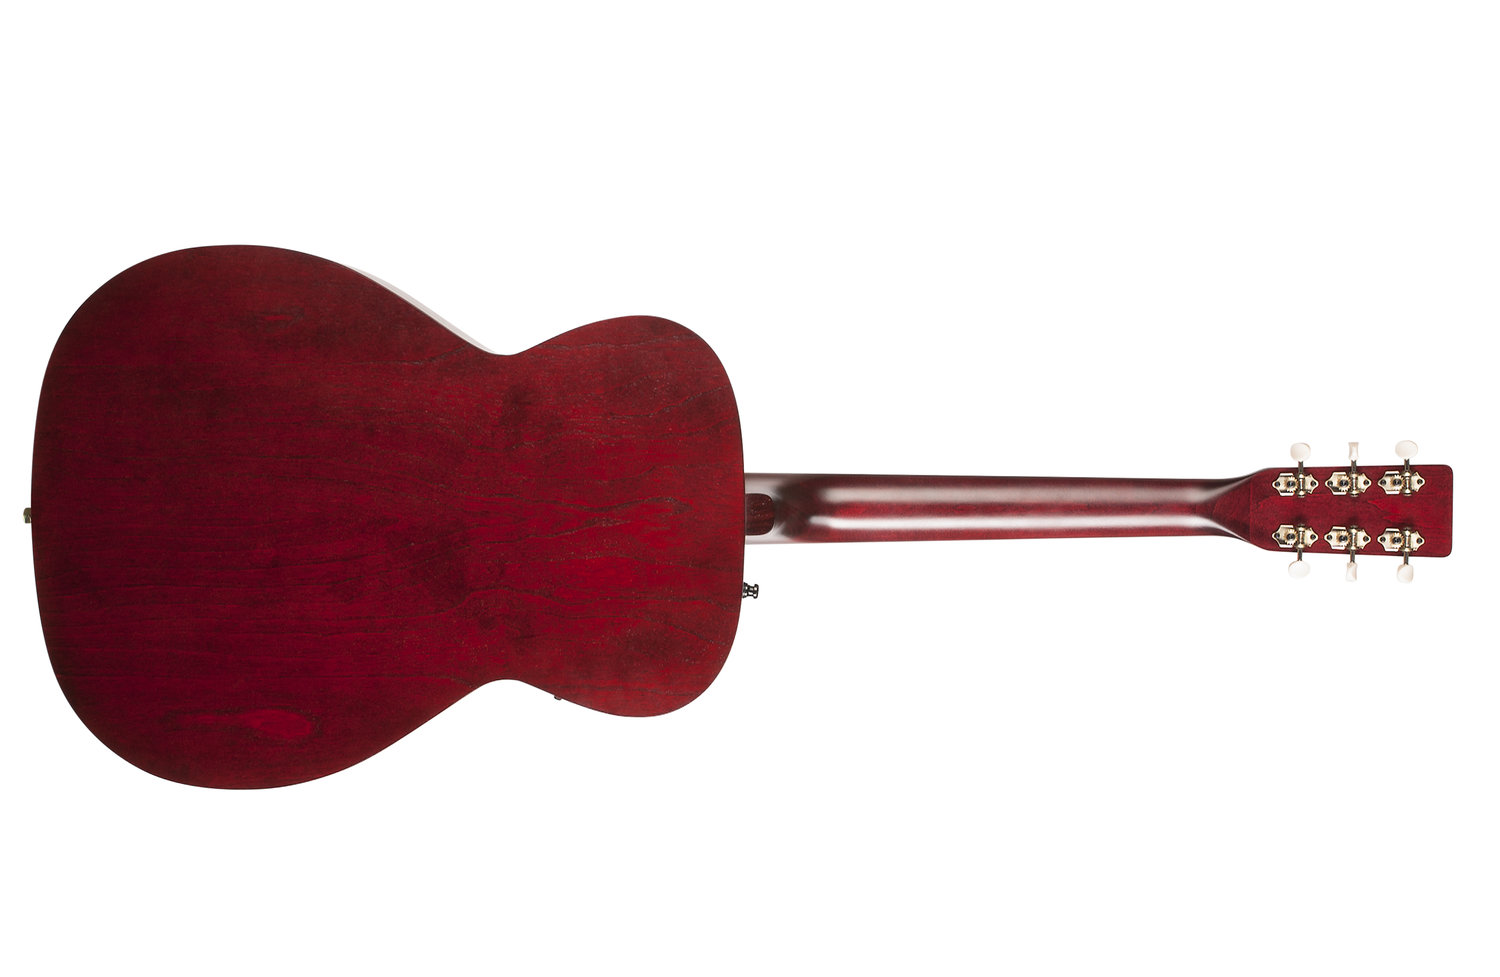 Art Et Lutherie Legacy Concert Hall Qit - Tennessee Red - Guitarra acústica & electro - Variation 1